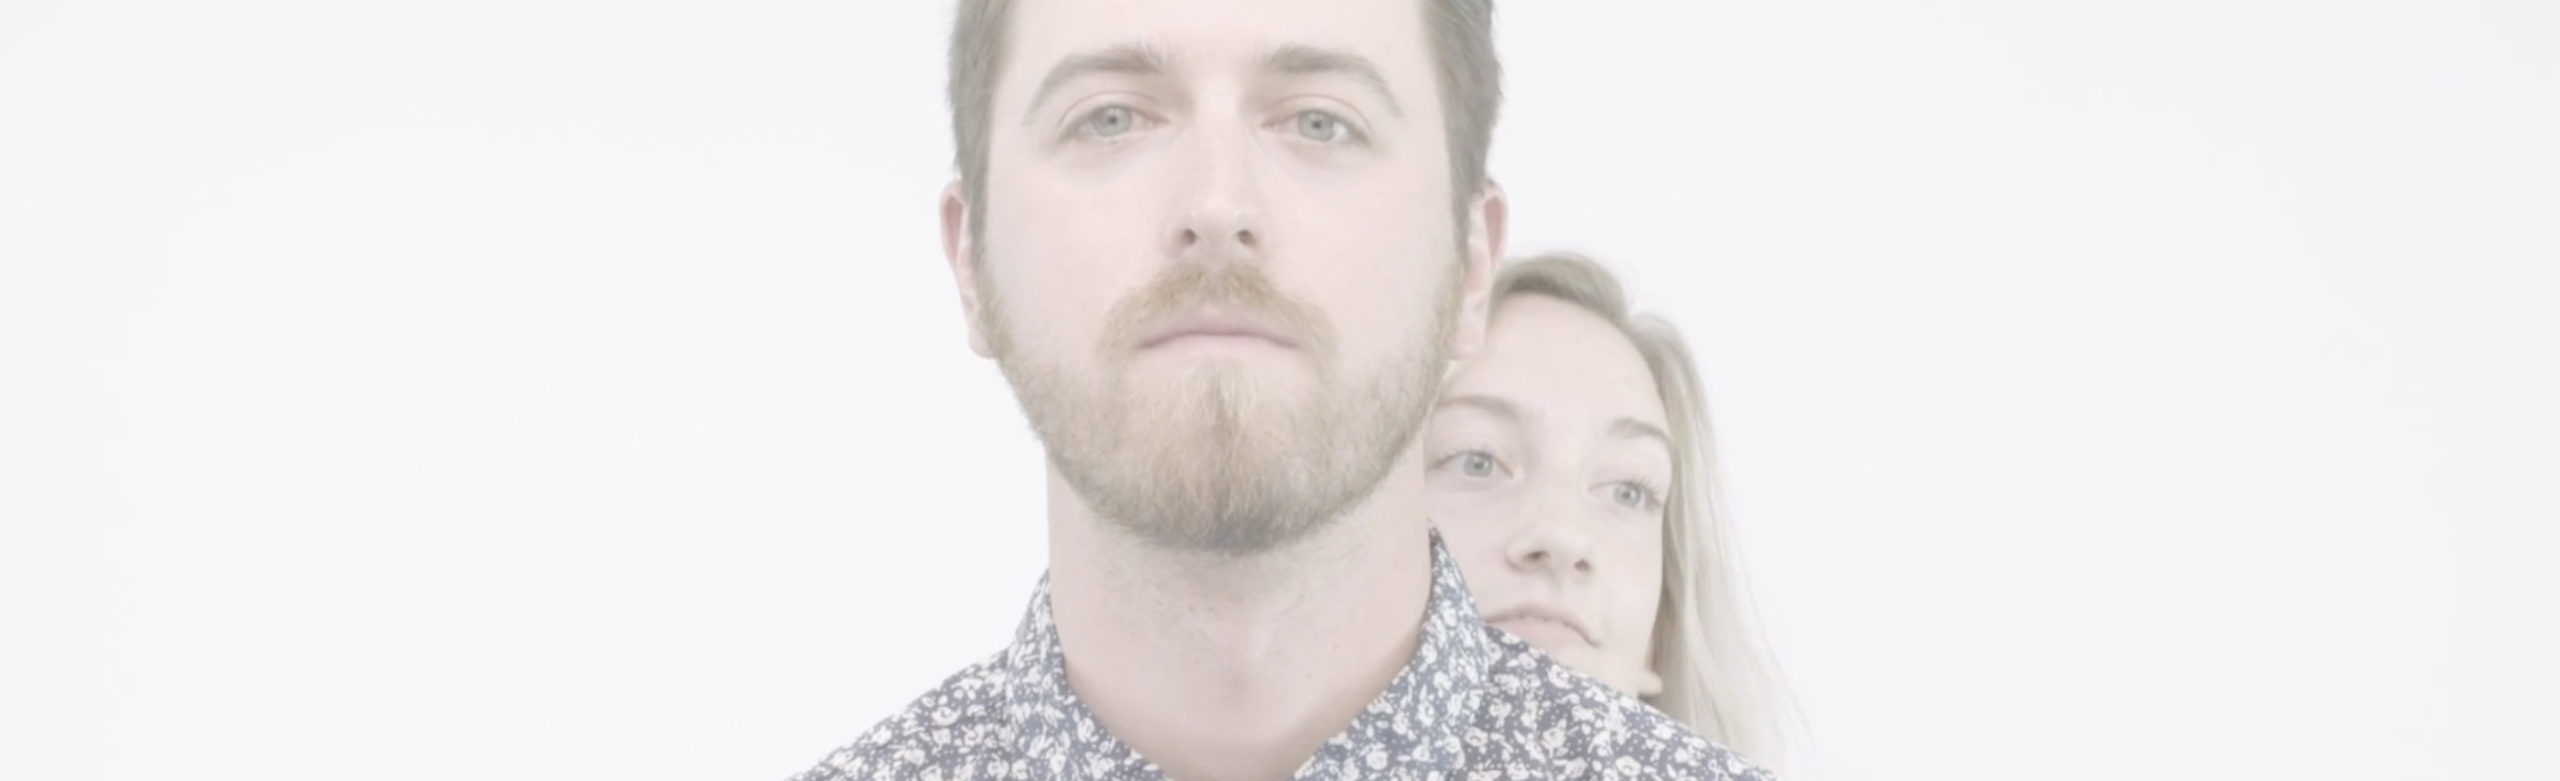 Watch Norwell “Kiss and Tell” on New Music Video for 2nd Single off Forthcoming Album Image